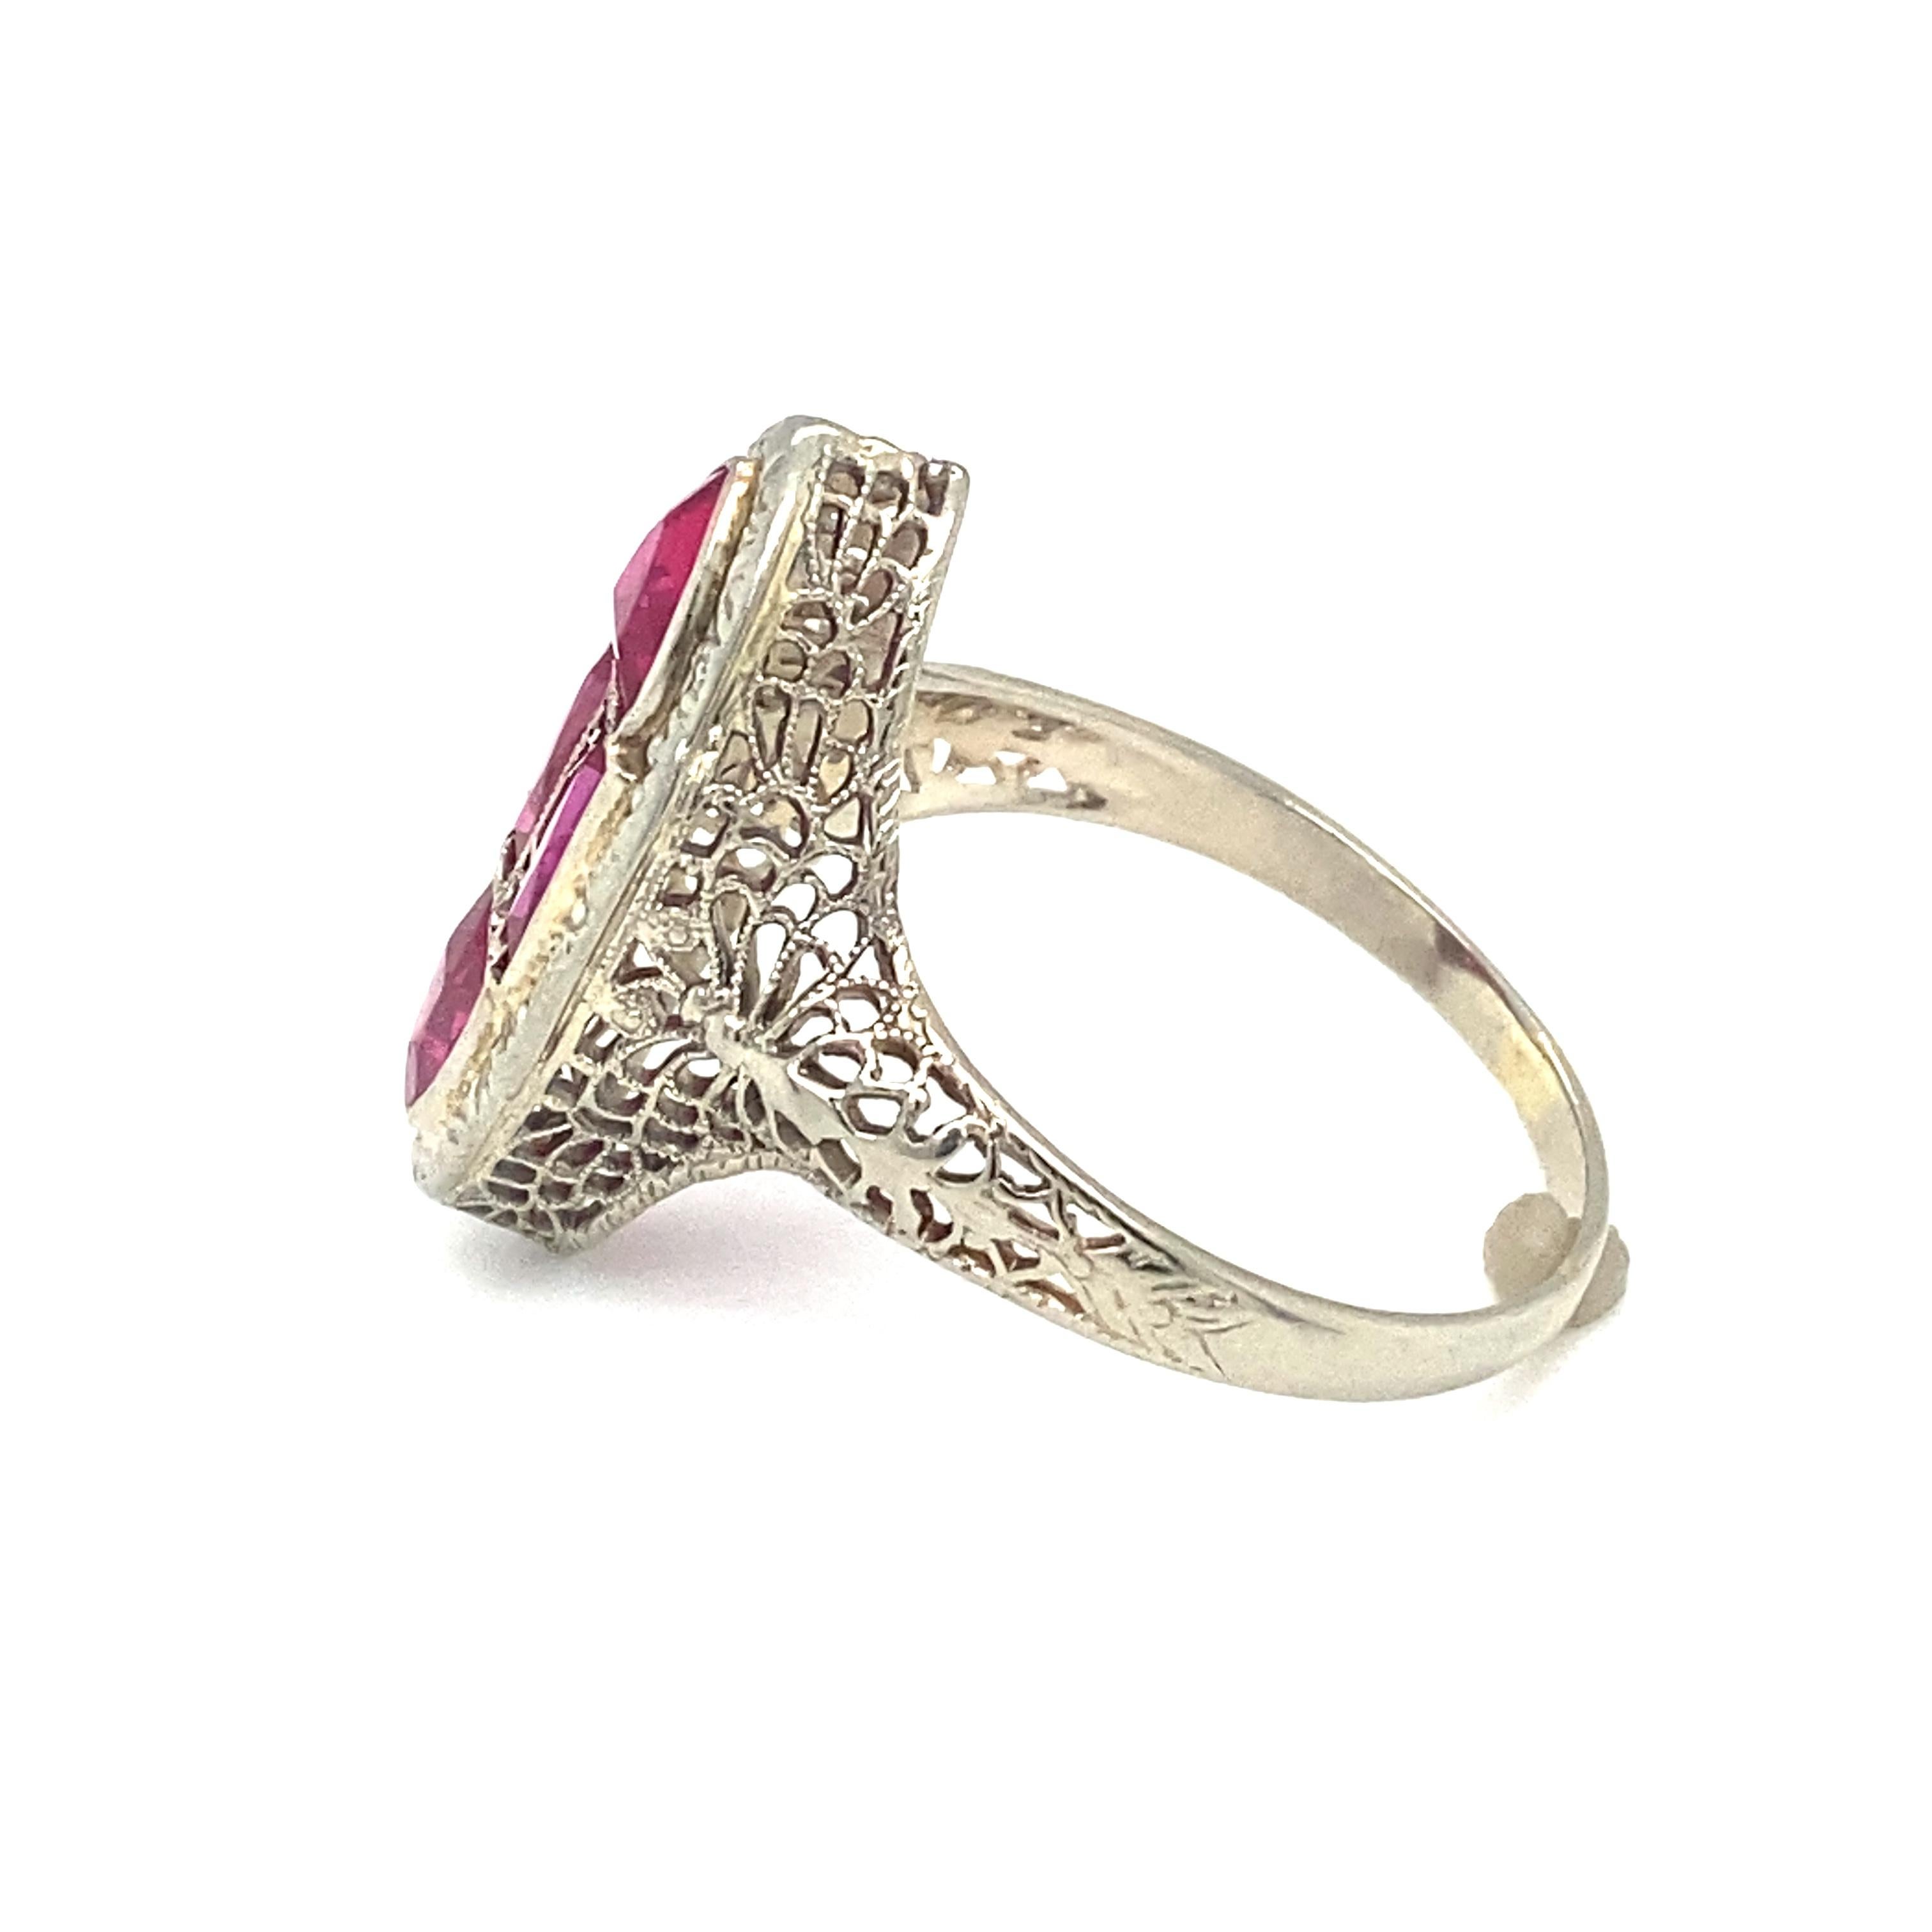 Baguette Cut Circa 1920s Art Deco Simulated Ruby Cocktail Ring in 14 Karat White Gold For Sale